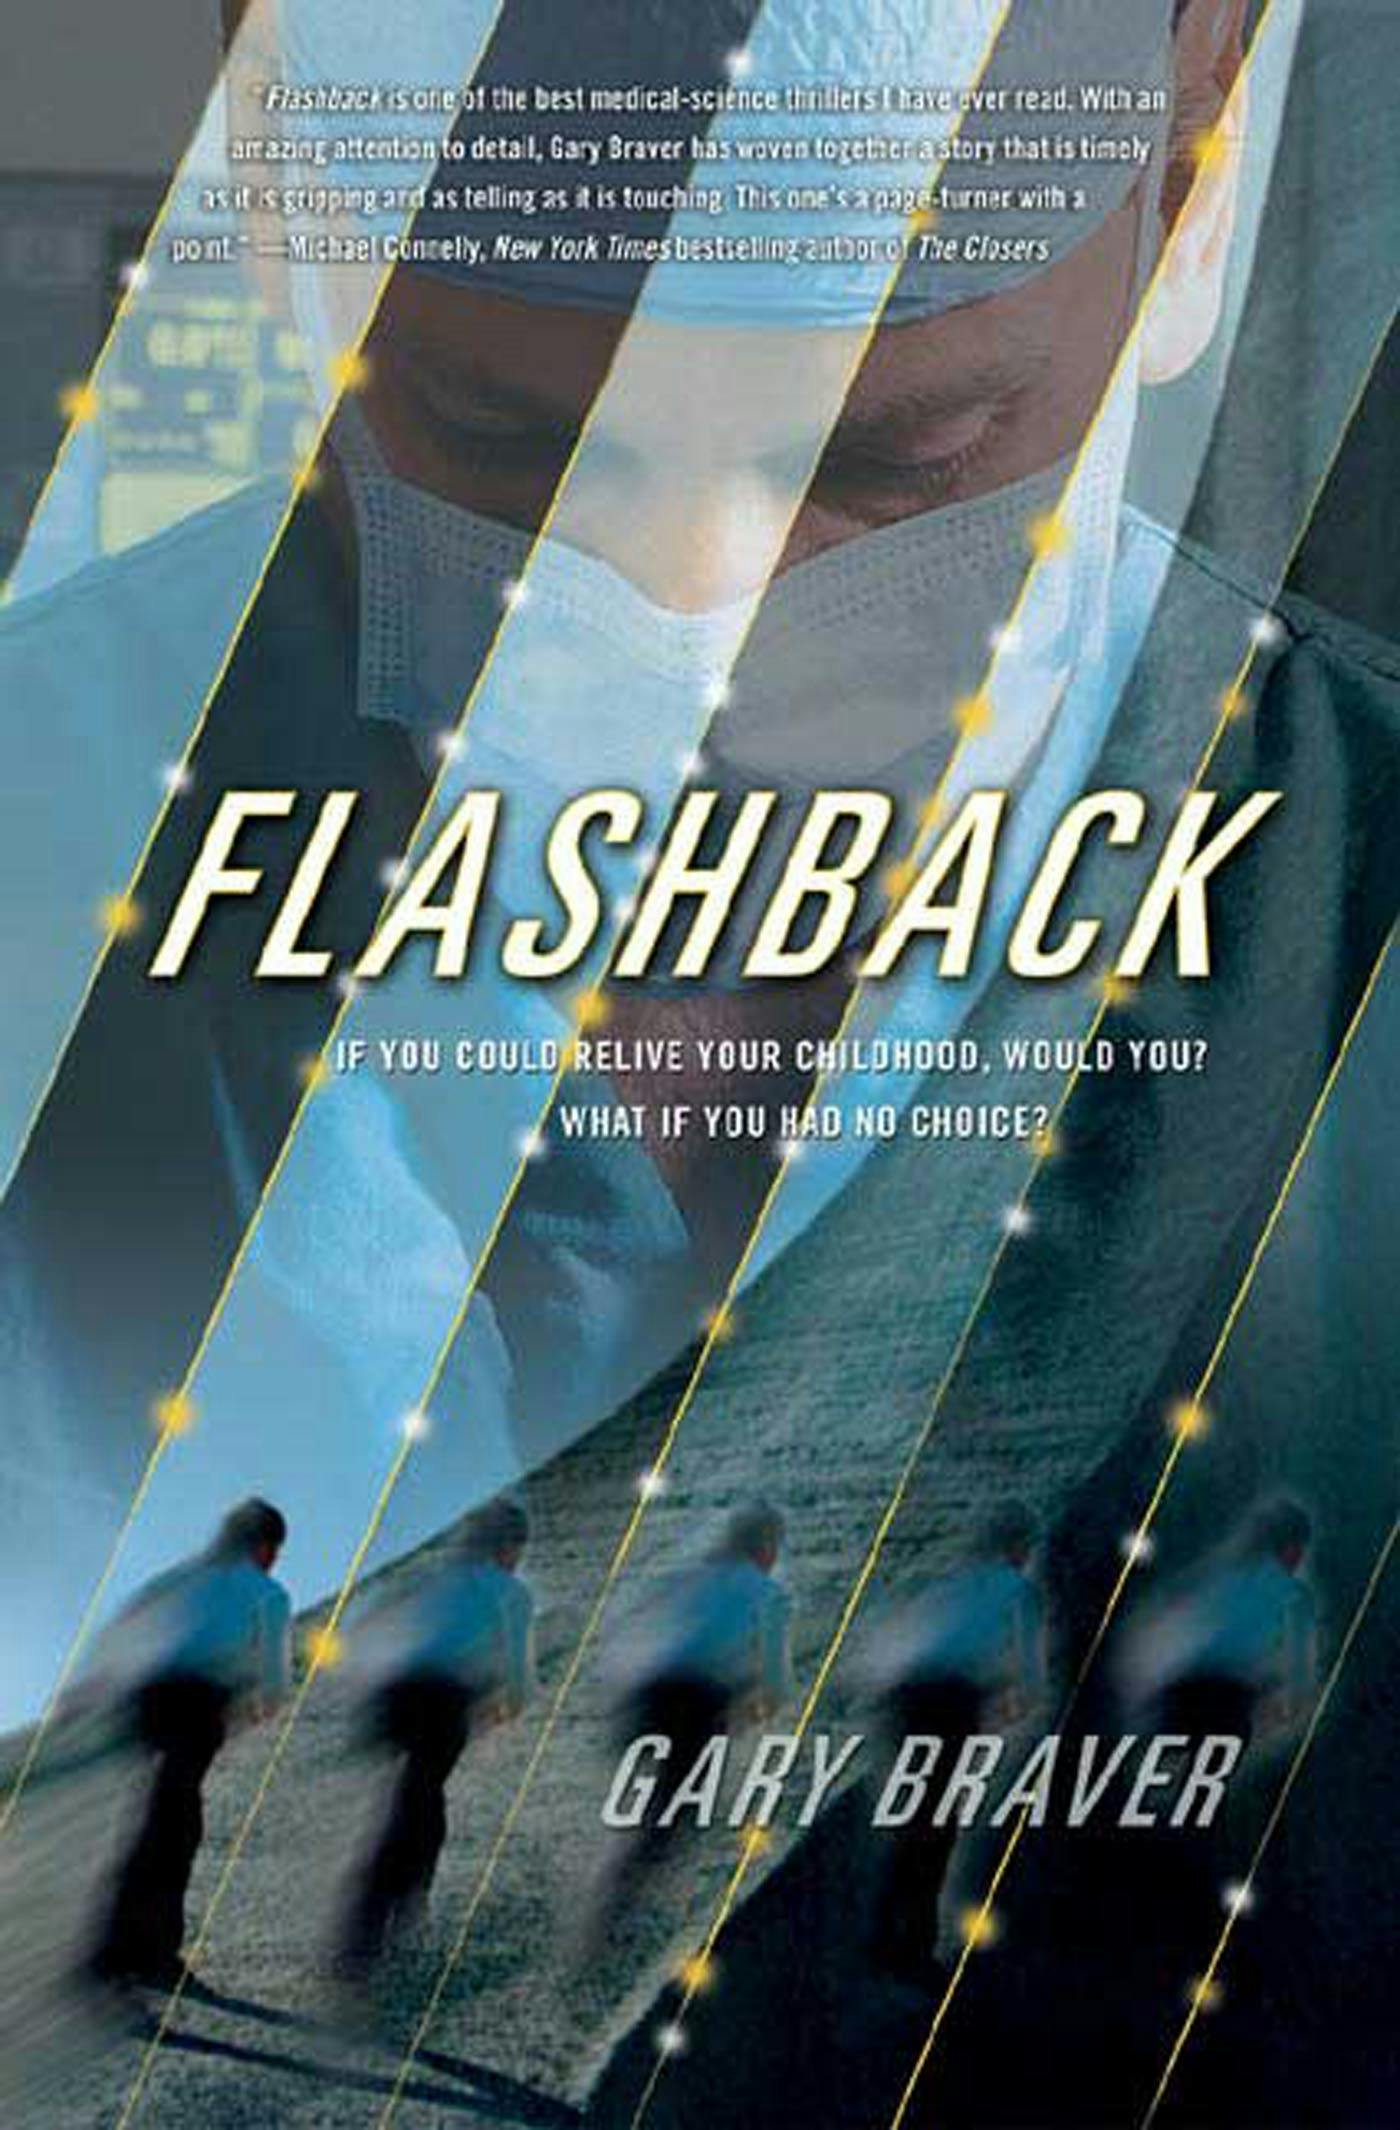 Cover for the book titled as: Flashback